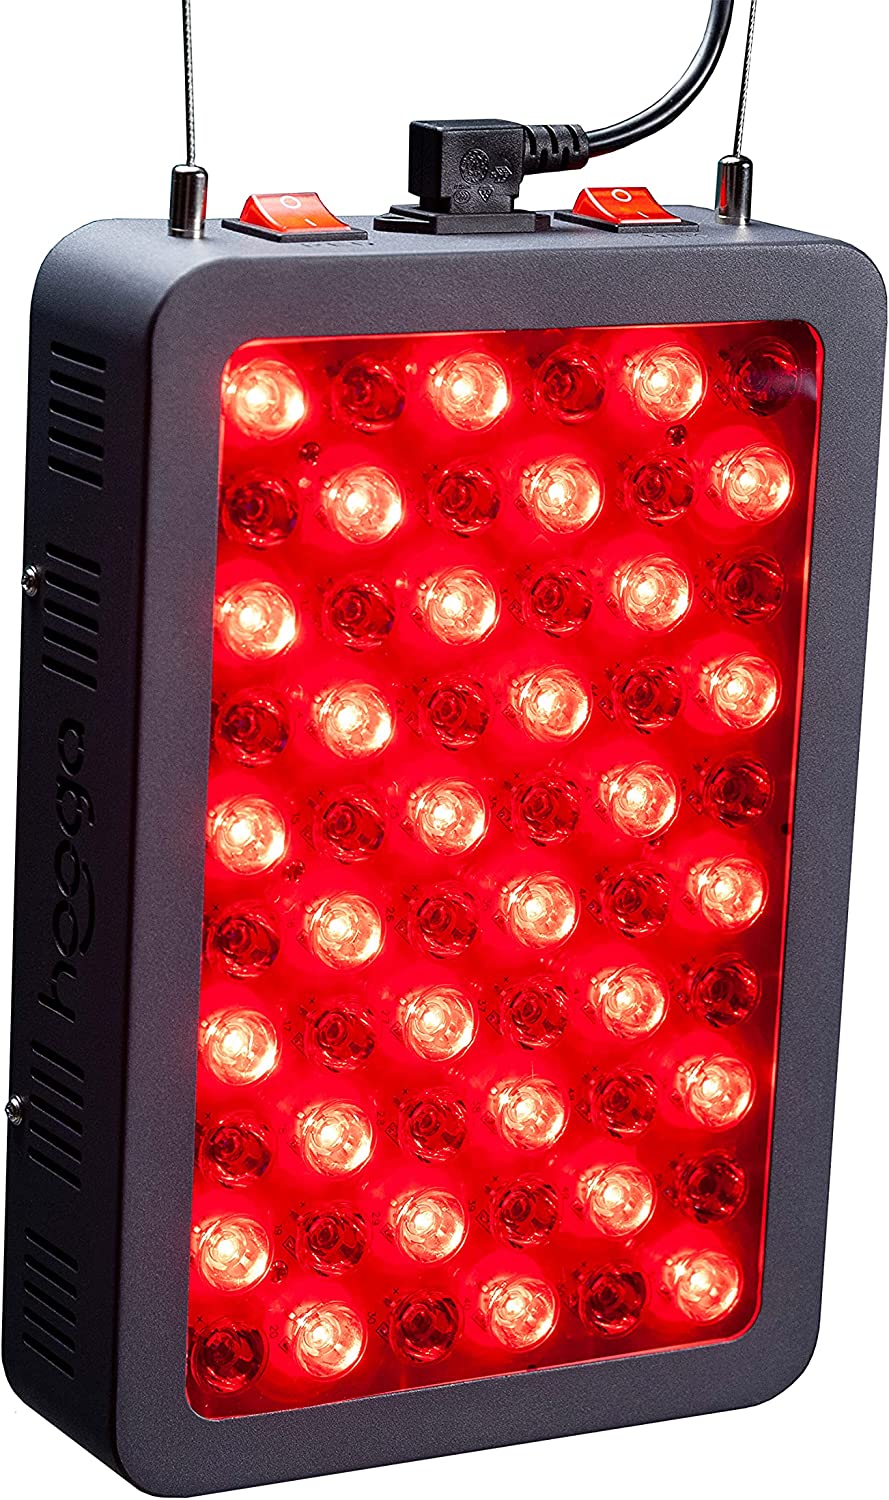 Hooga Red Light Therapy Device